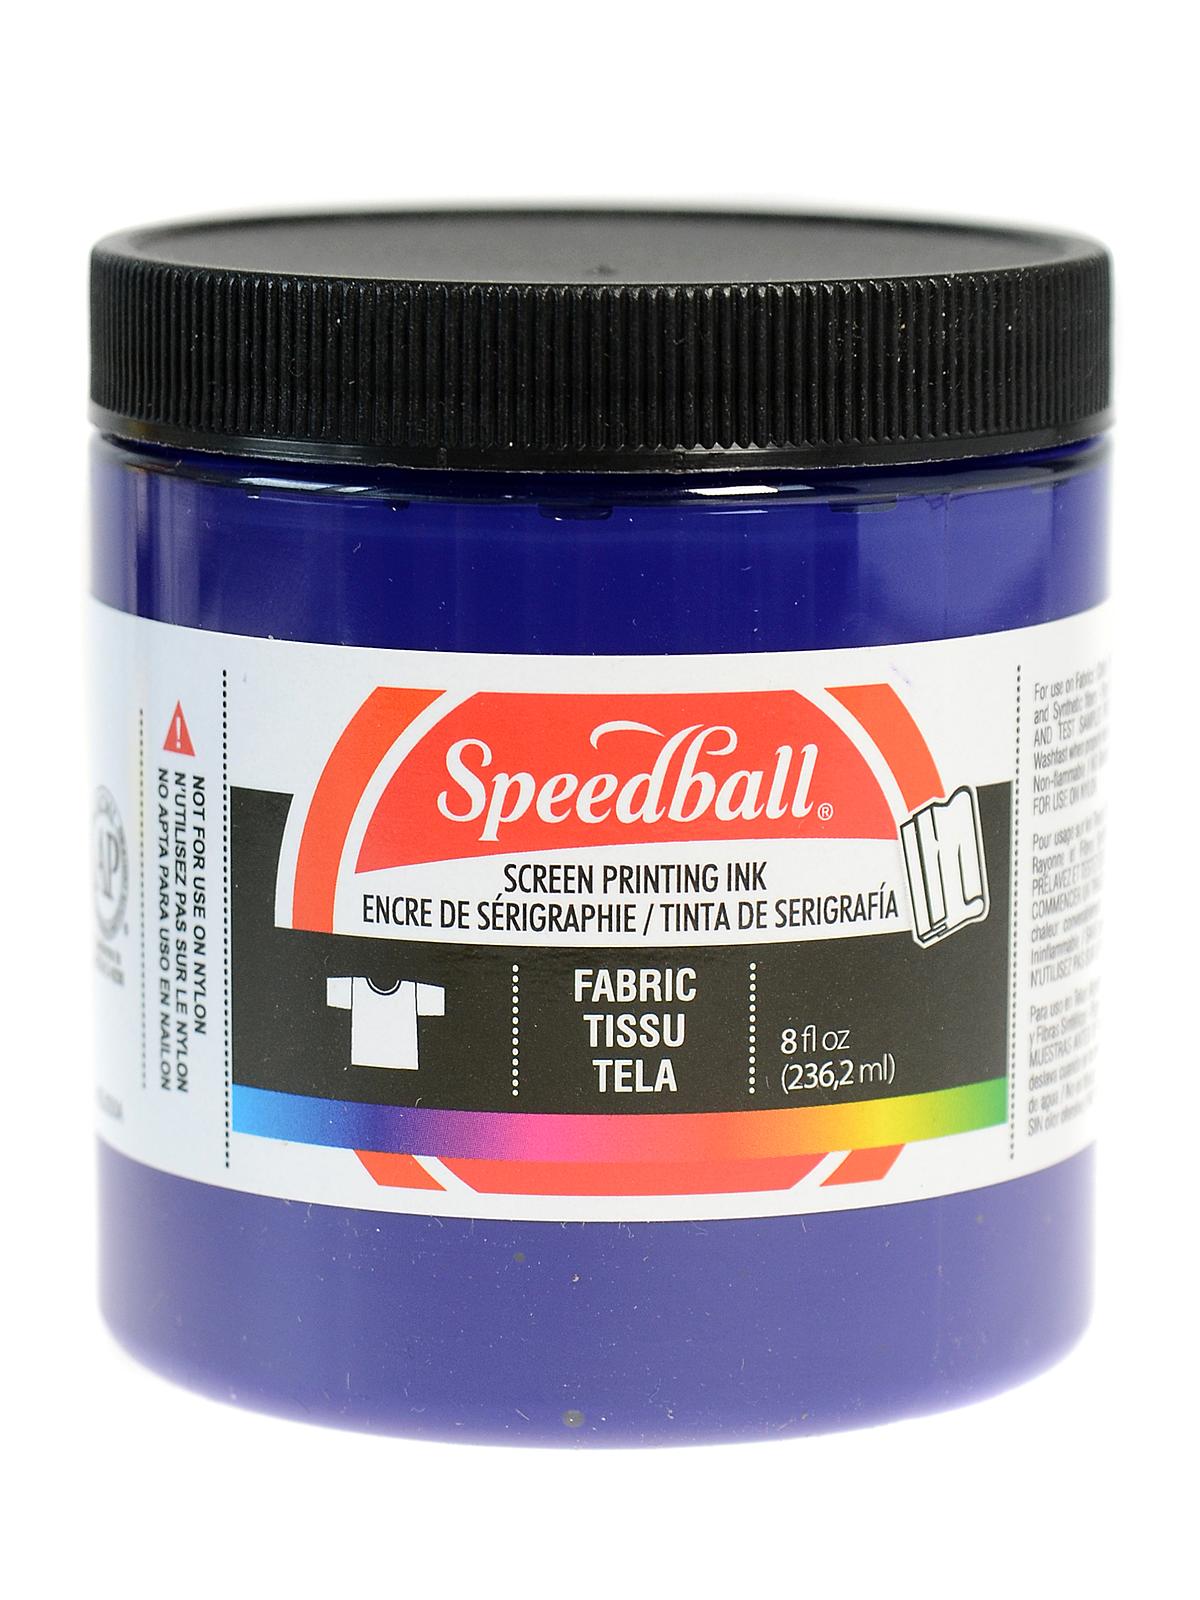 Speedball Opaque Fabric Screen Printing Ink, 32-Ounce, Pearly White